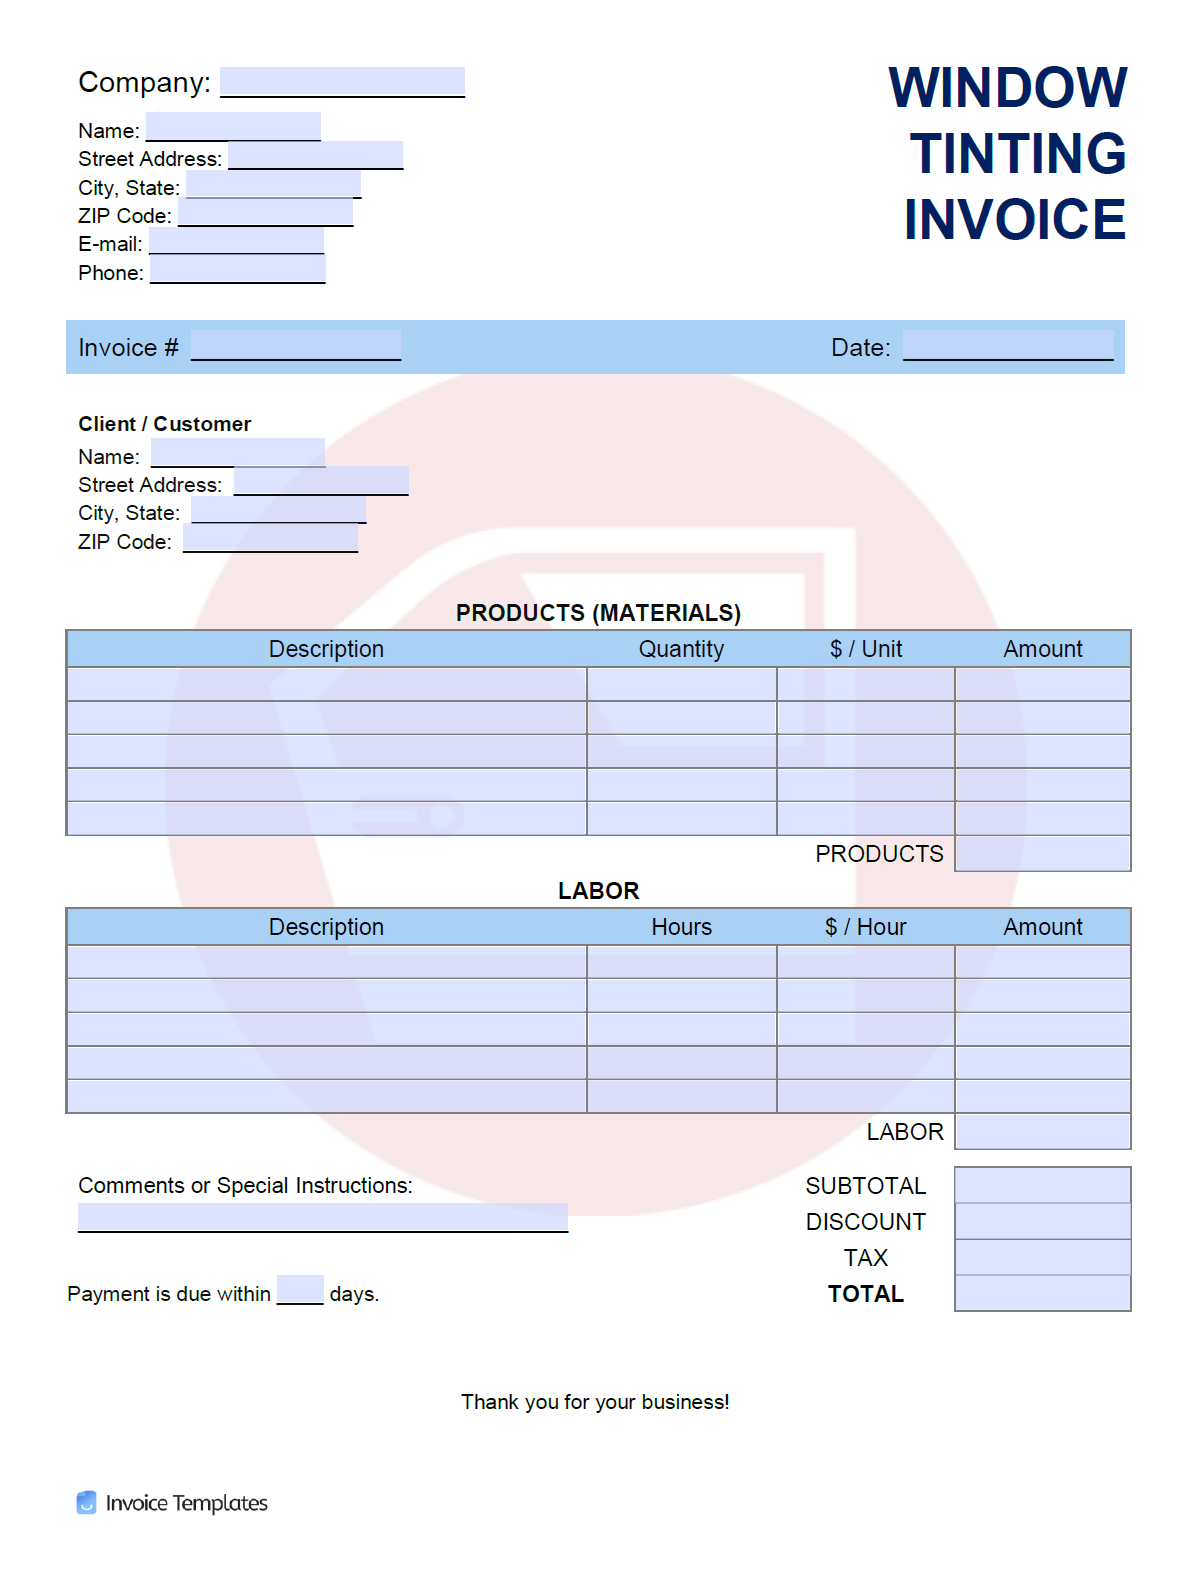 Free Window Tinting Invoice Template Pdf Word Excel